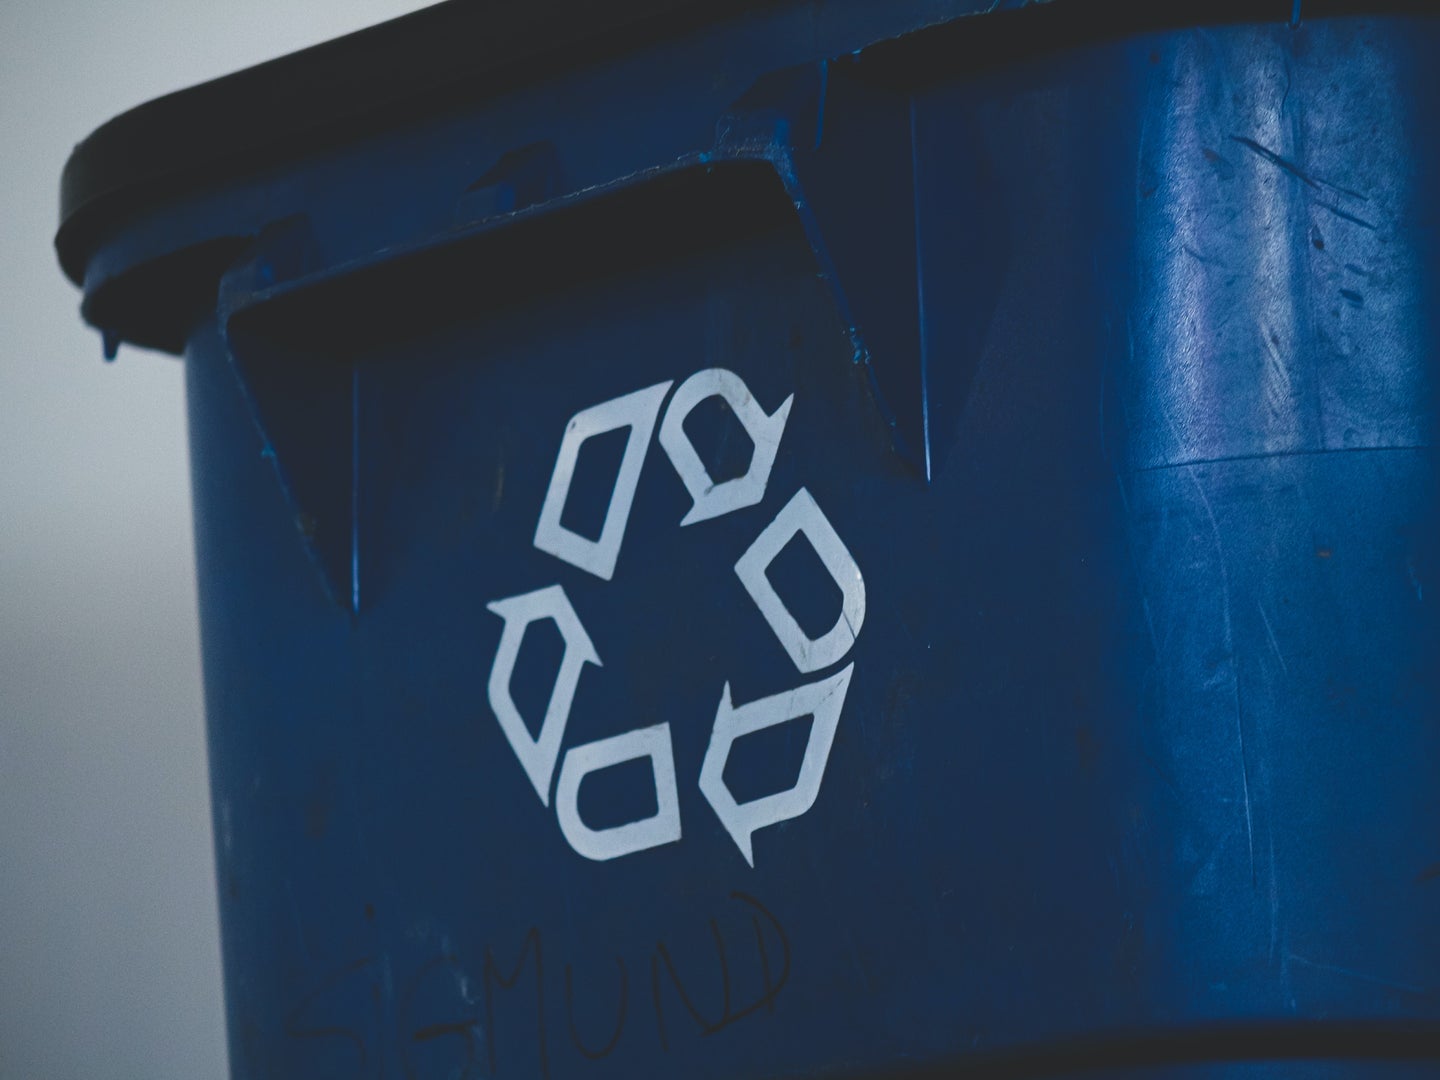 A blue recycling bin with a recycling symbol on it.